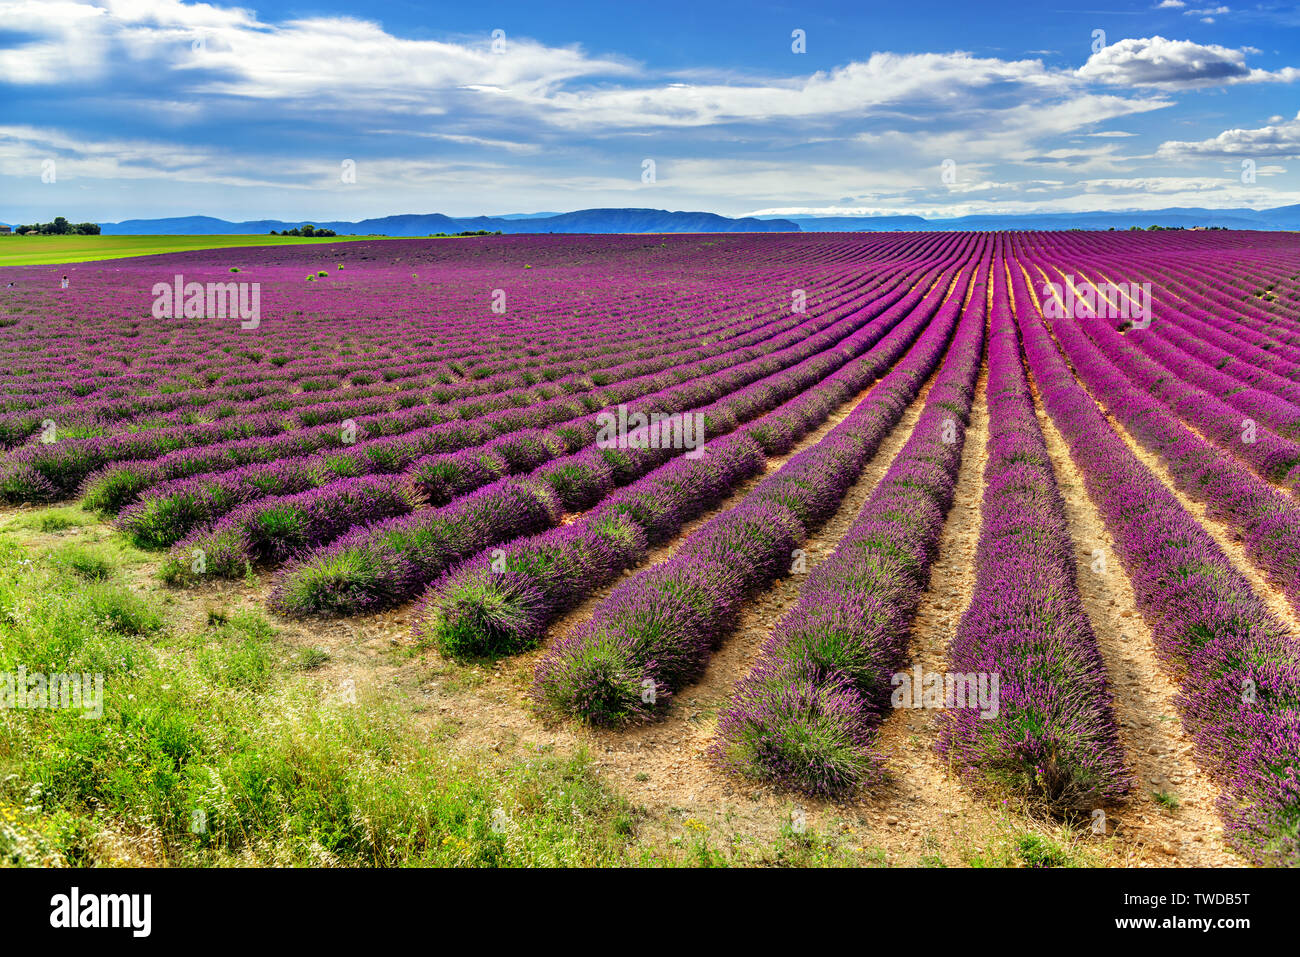 Endless lavender fields in Valensole, Provance, France. Unique place to visit Stock Photo